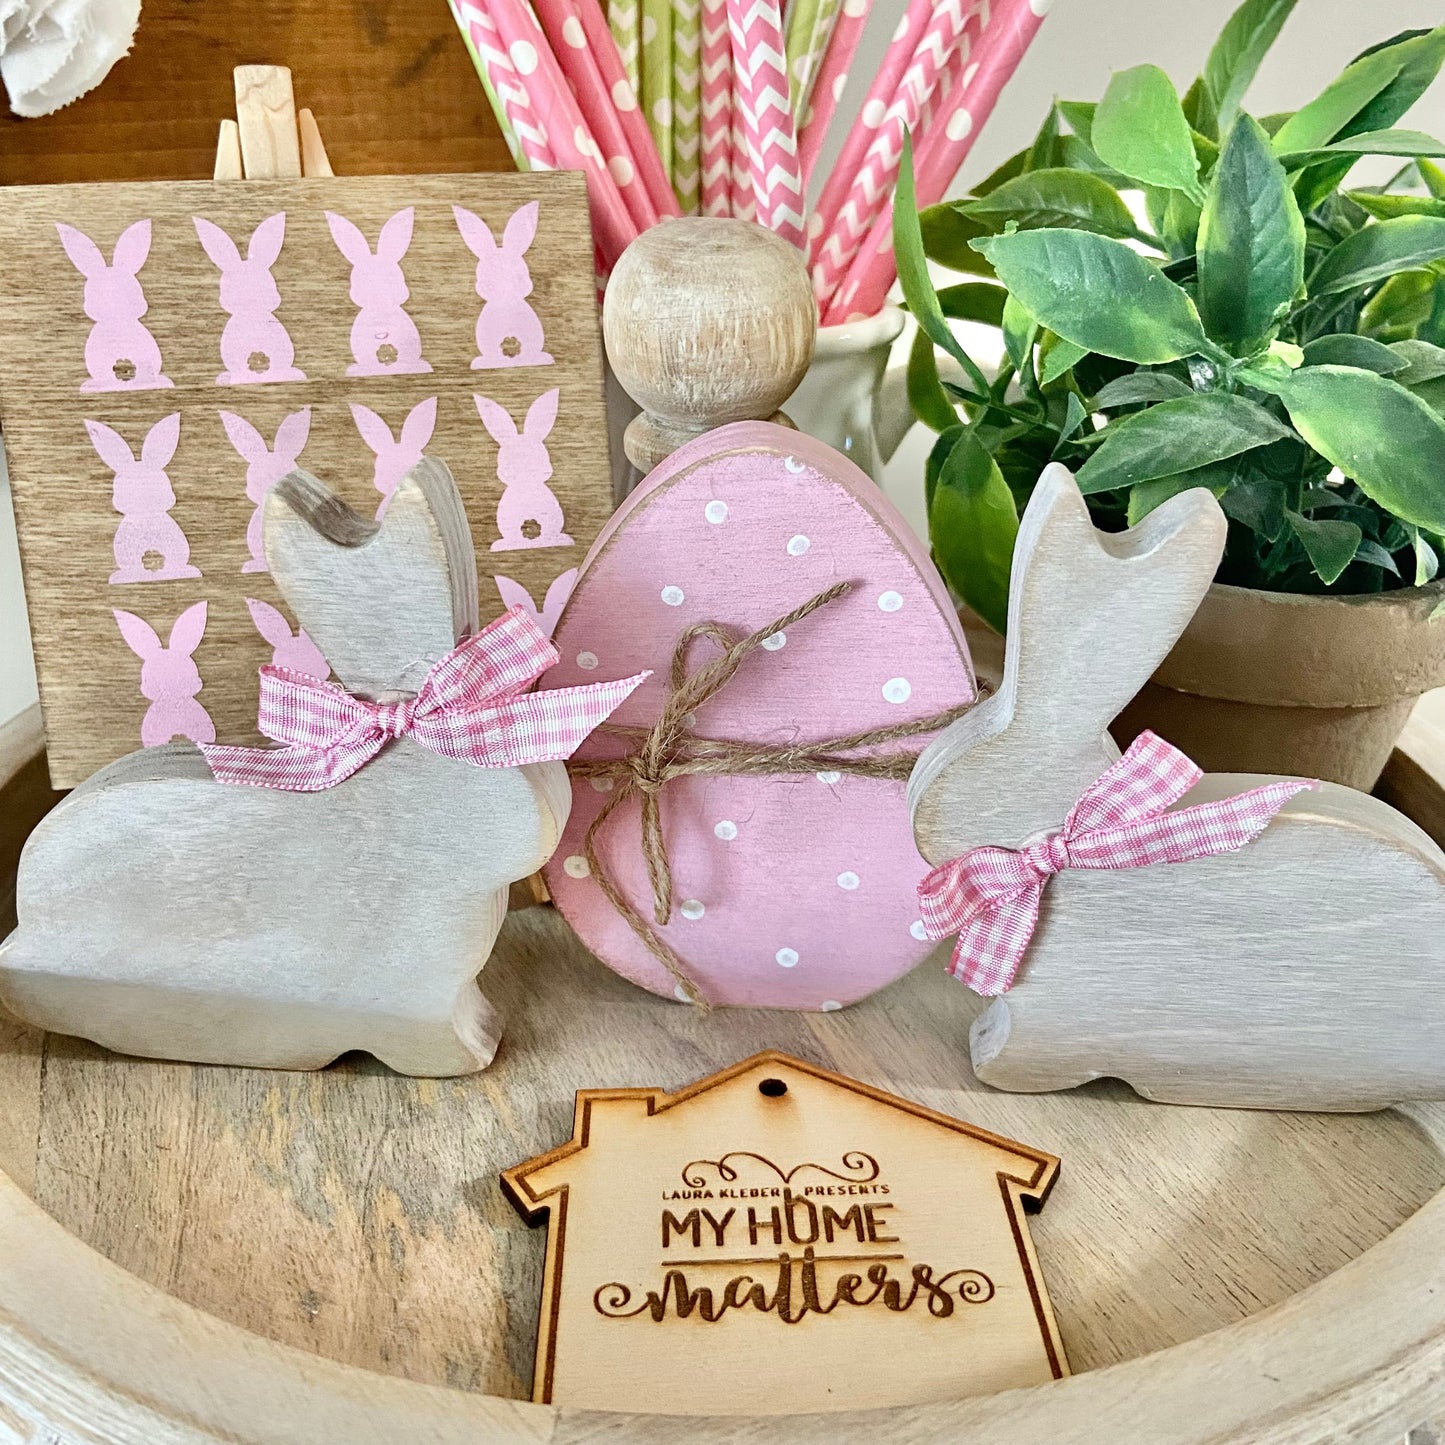 DIY Interchangeable Tiles - Easter Themes